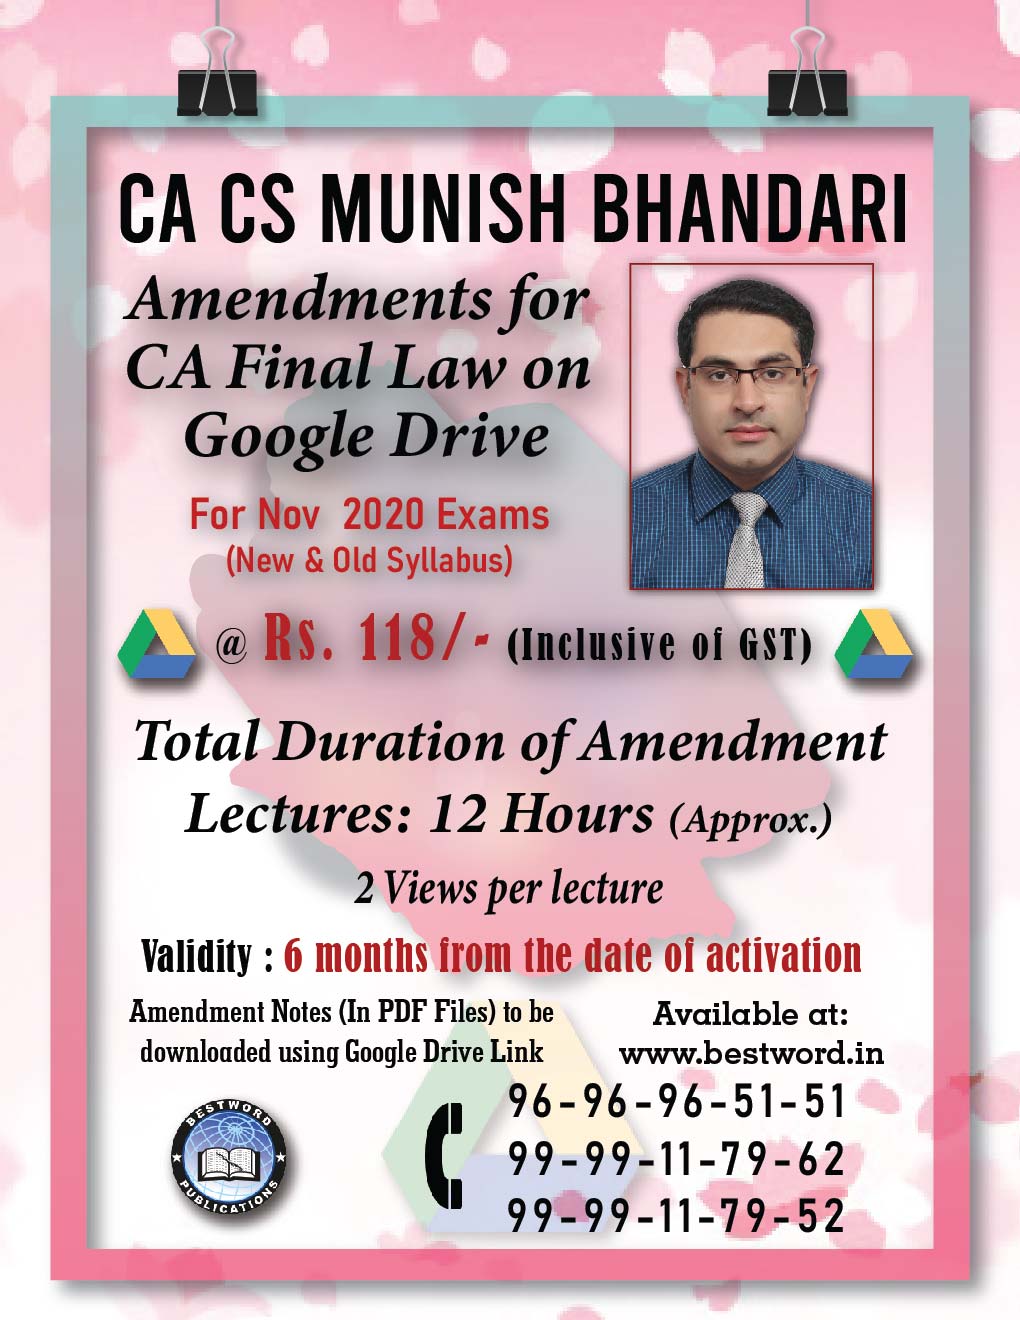 amendments-for-ca-(final)-law-on-google-drive---for-november-2020-exams-(new-and-old-syllabus)